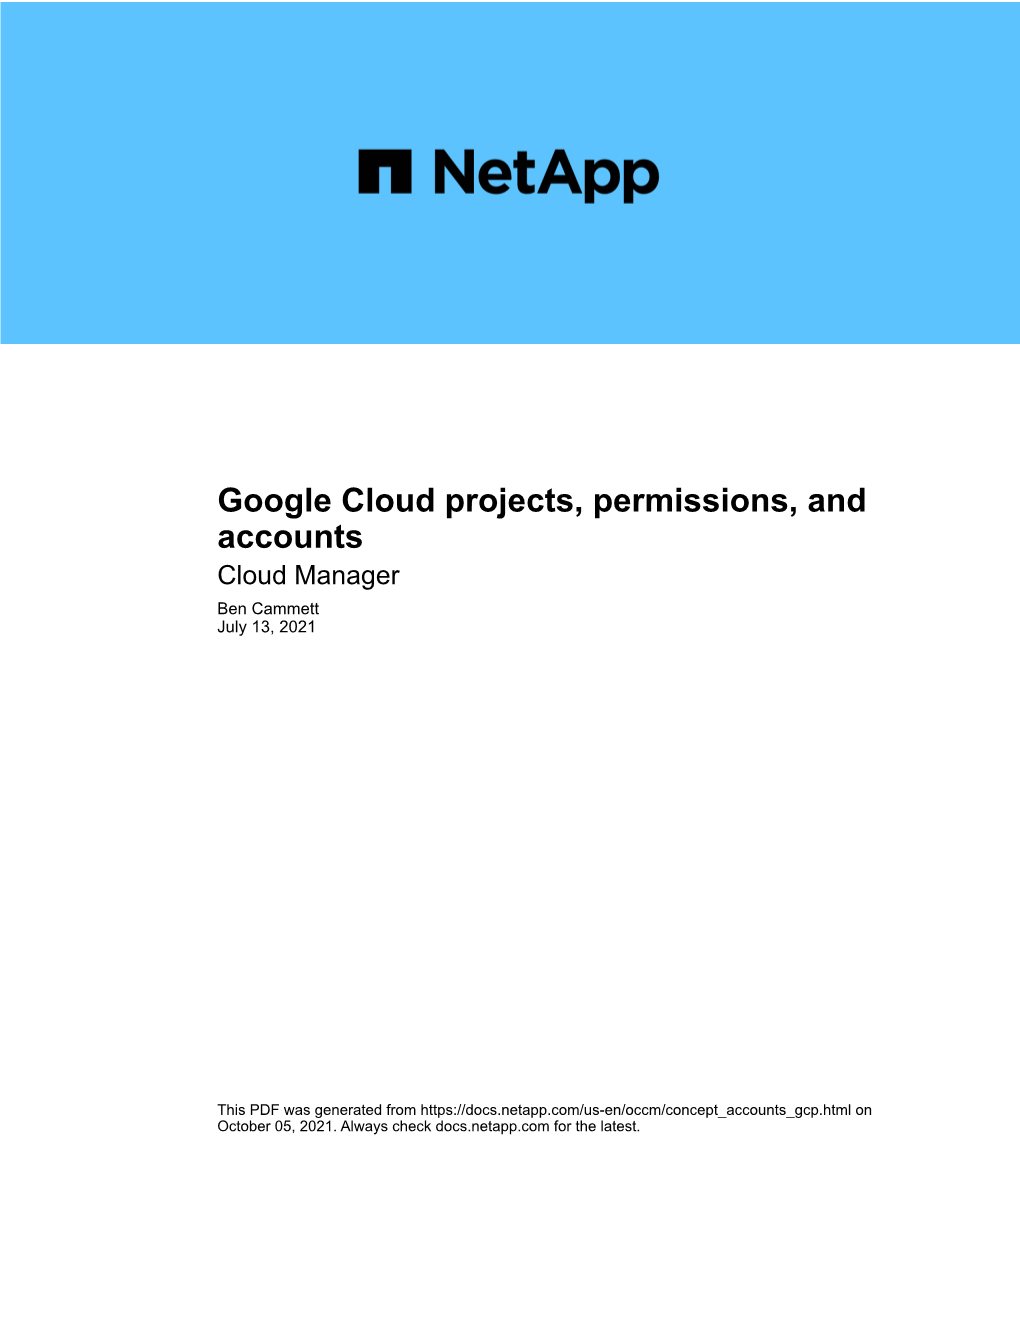 Google Cloud Projects, Permissions, and Accounts Cloud Manager Ben Cammett July 13, 2021